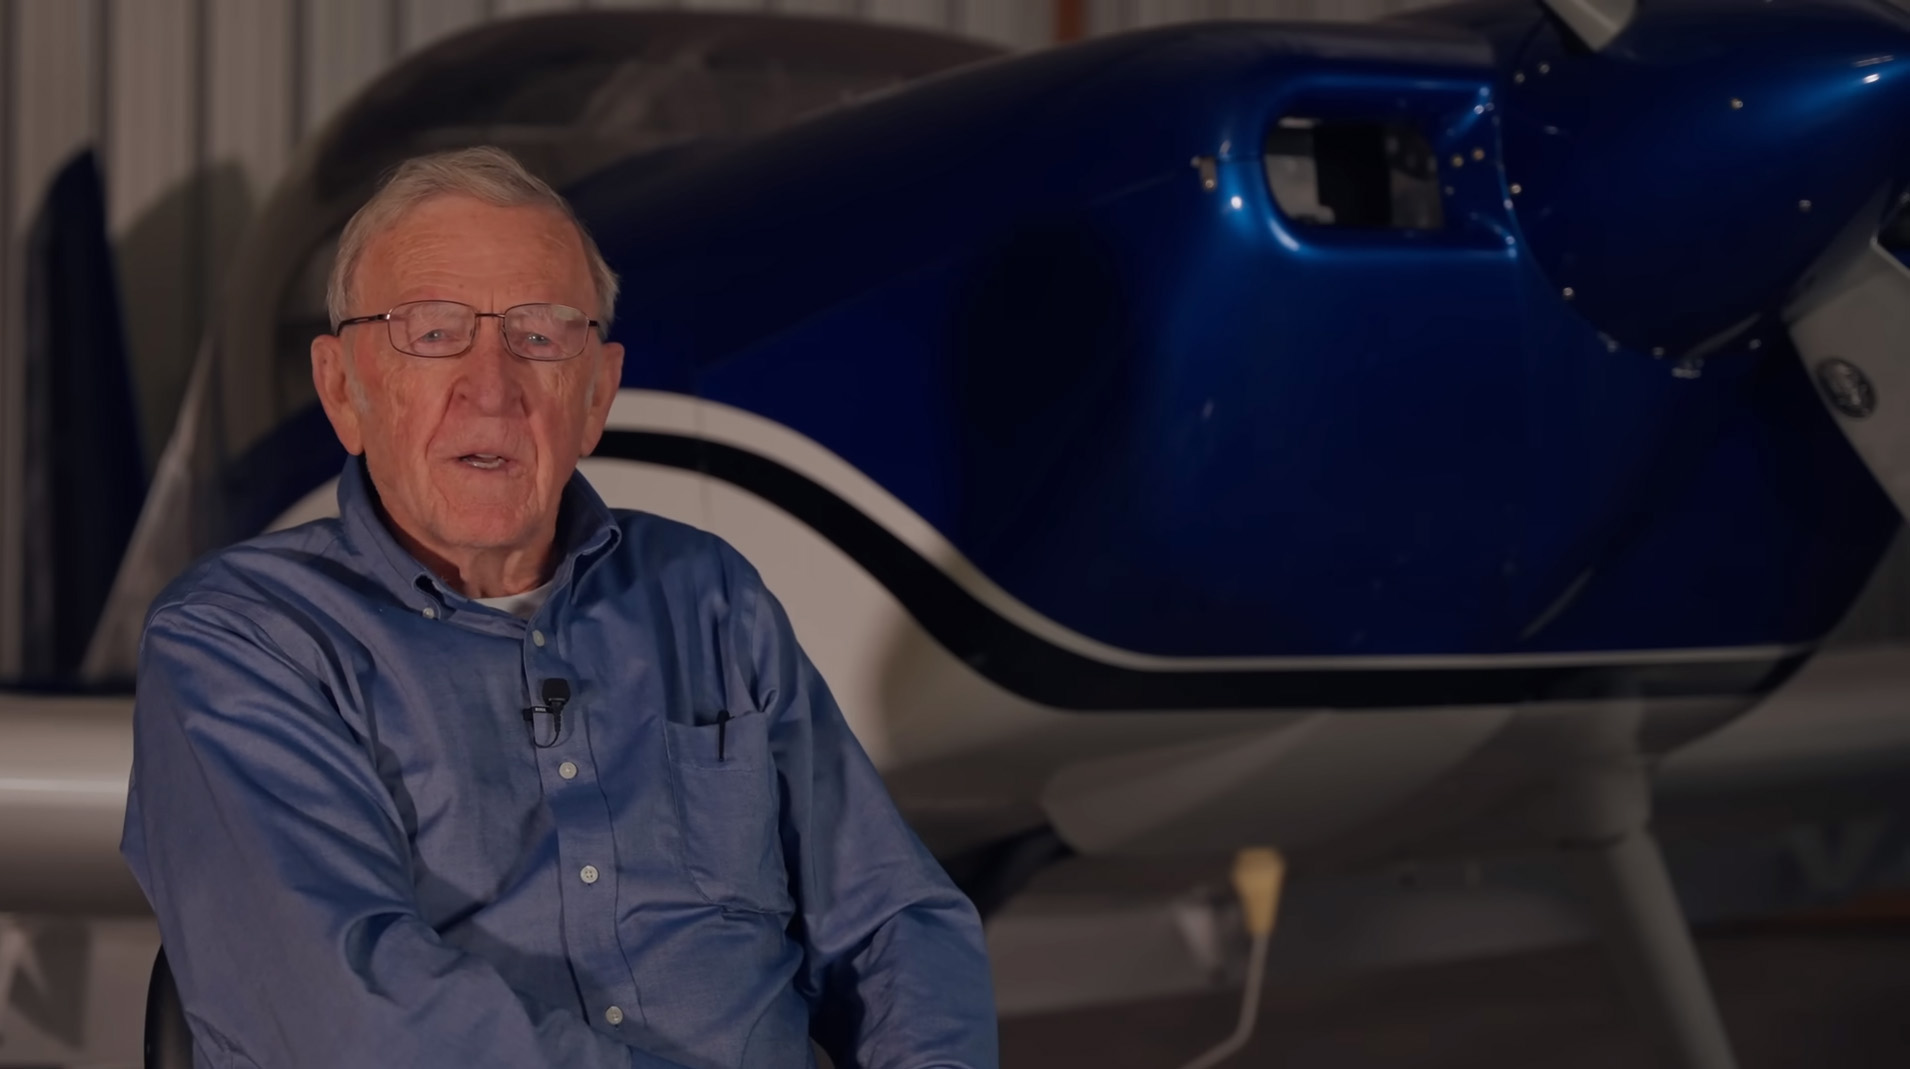 Van's Aircraft founder Richard "Dick" VanGrunsven posted a video October 27 explaining the company's "difficult" financial situation, and the plan to recover from it. Van's Aircraft image via YouTube.